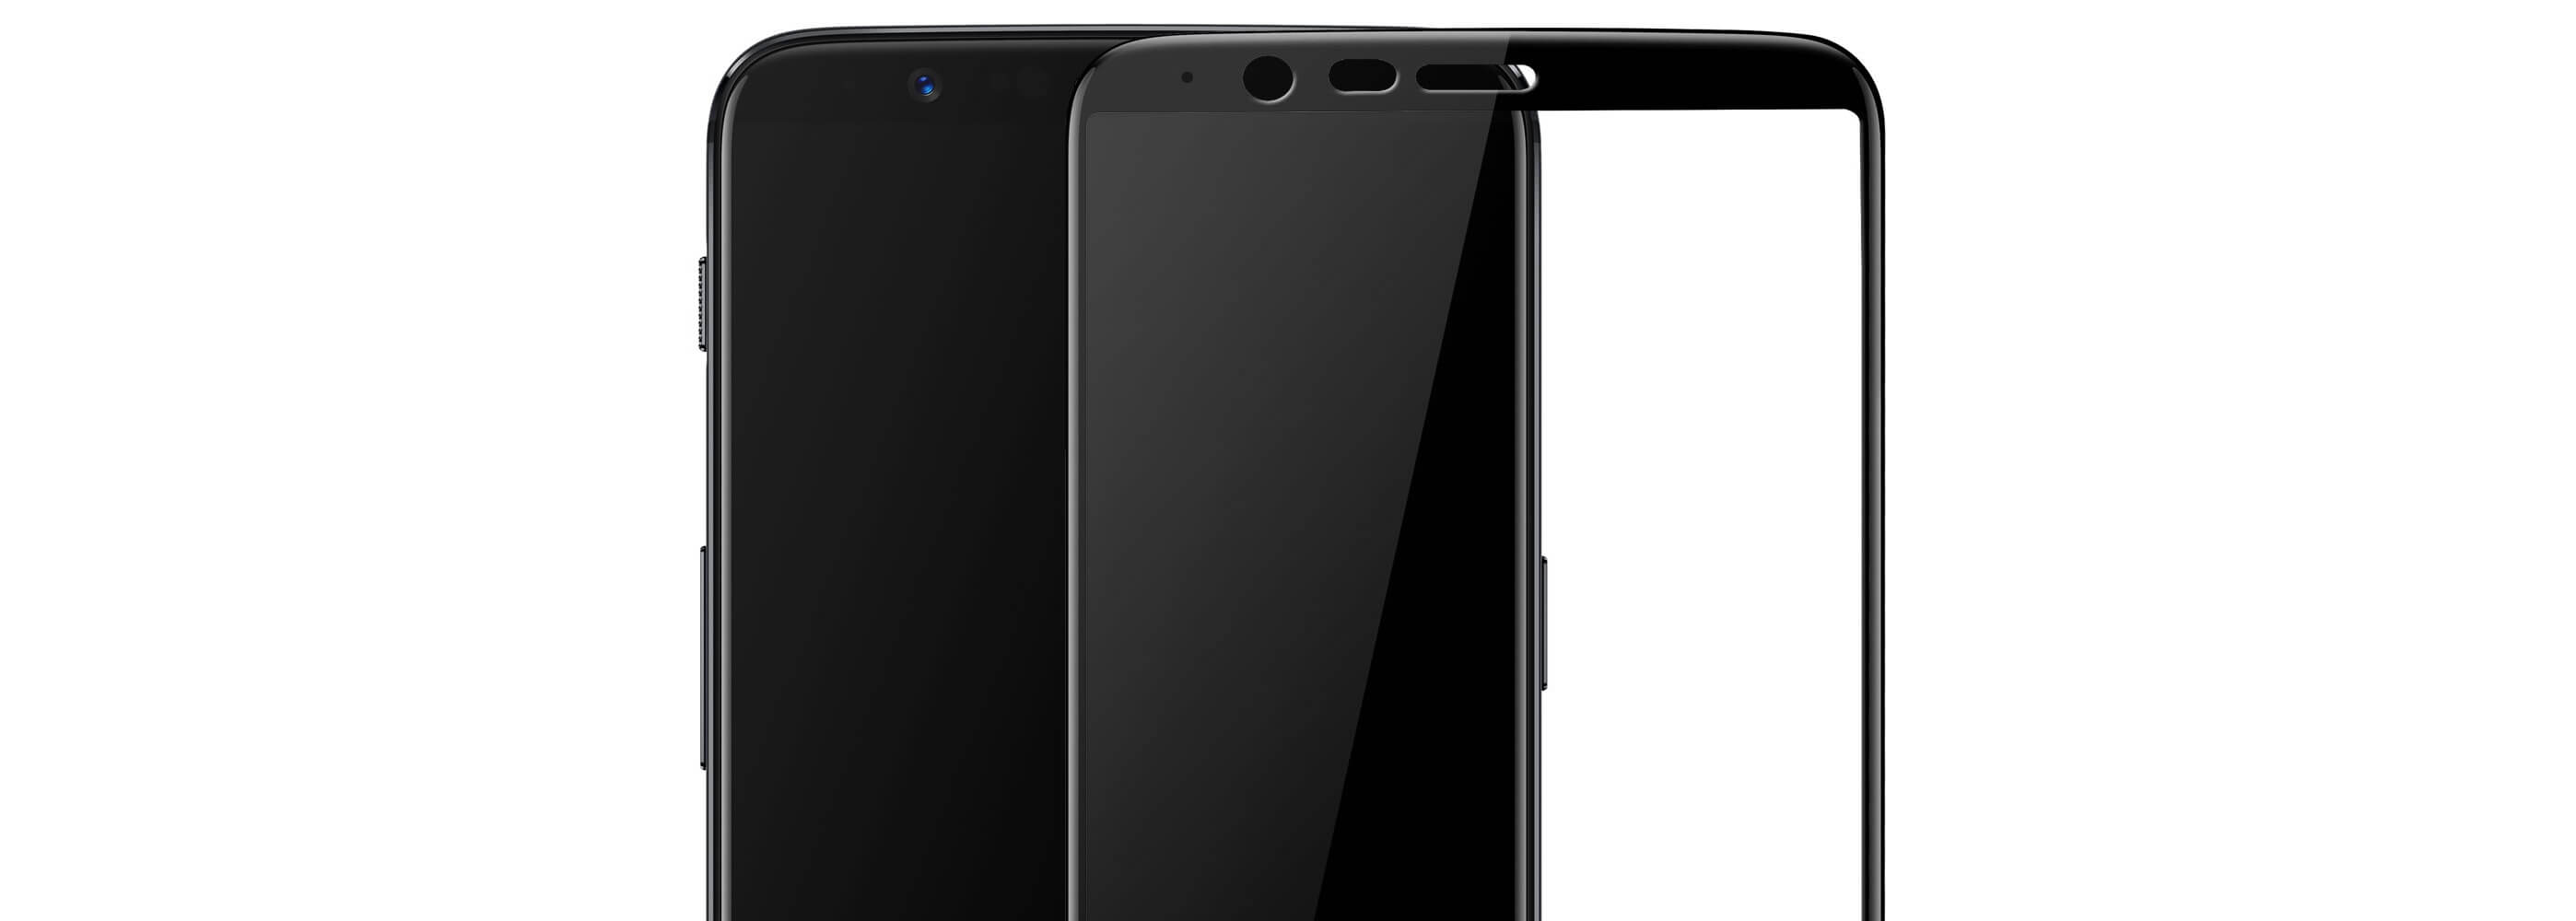 Tempered glass screen protector for Oneplus 5T